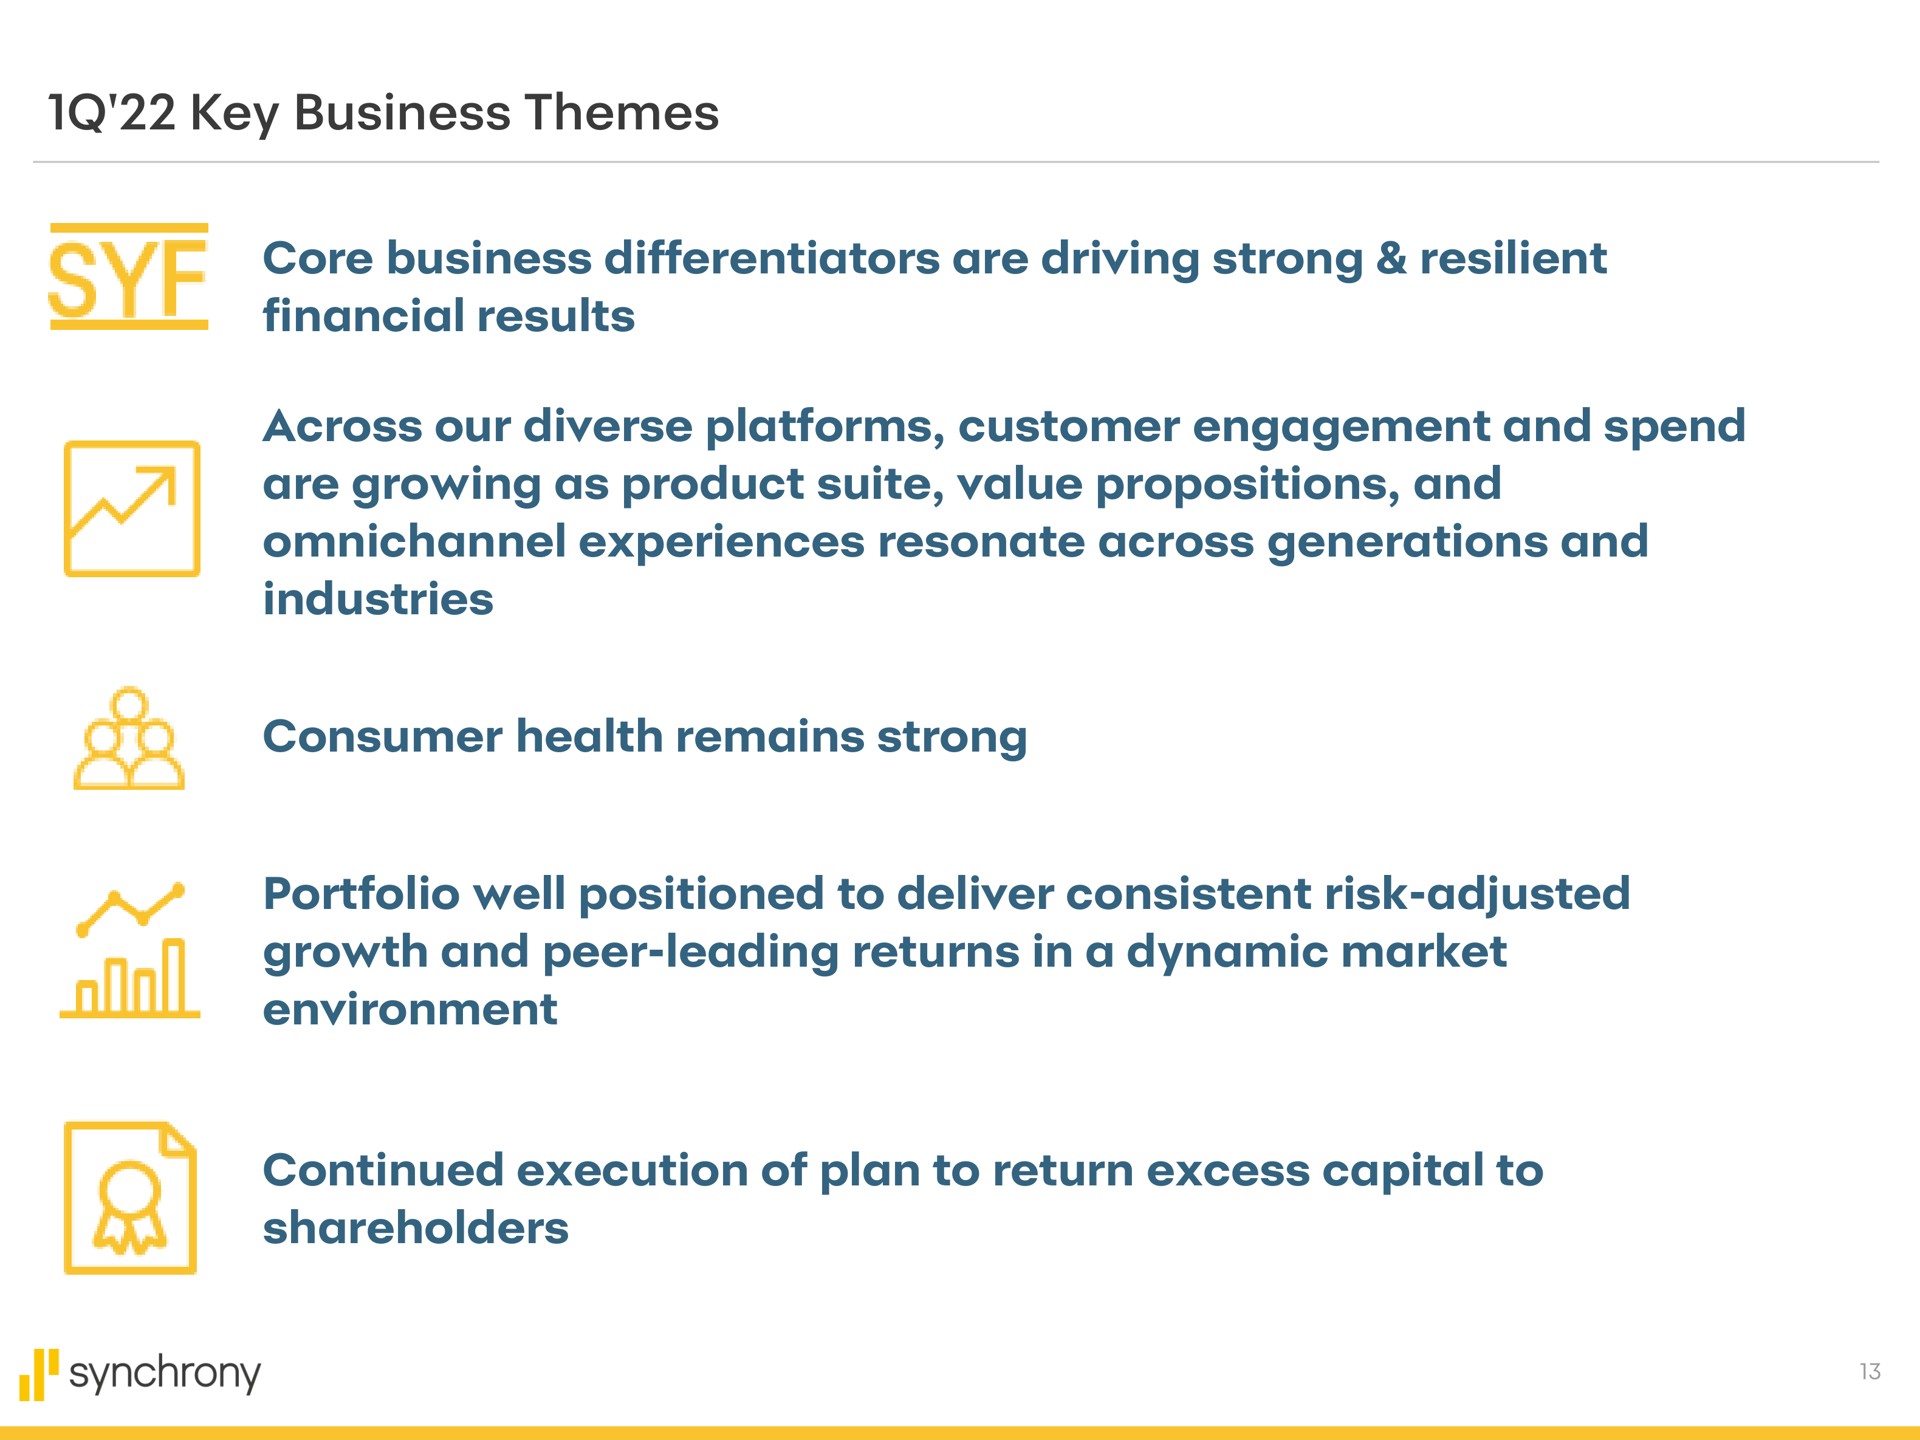 key business themes core business differentiators are driving strong resilient financial results across our diverse platforms customer engagement and spend are growing as product suite value propositions and experiences resonate across generations and industries consumer health remains strong portfolio well positioned to deliver consistent risk adjusted growth and peer leading returns in a dynamic market environment continued execution of plan to return excess capital to shareholders synchrony | Synchrony Financial